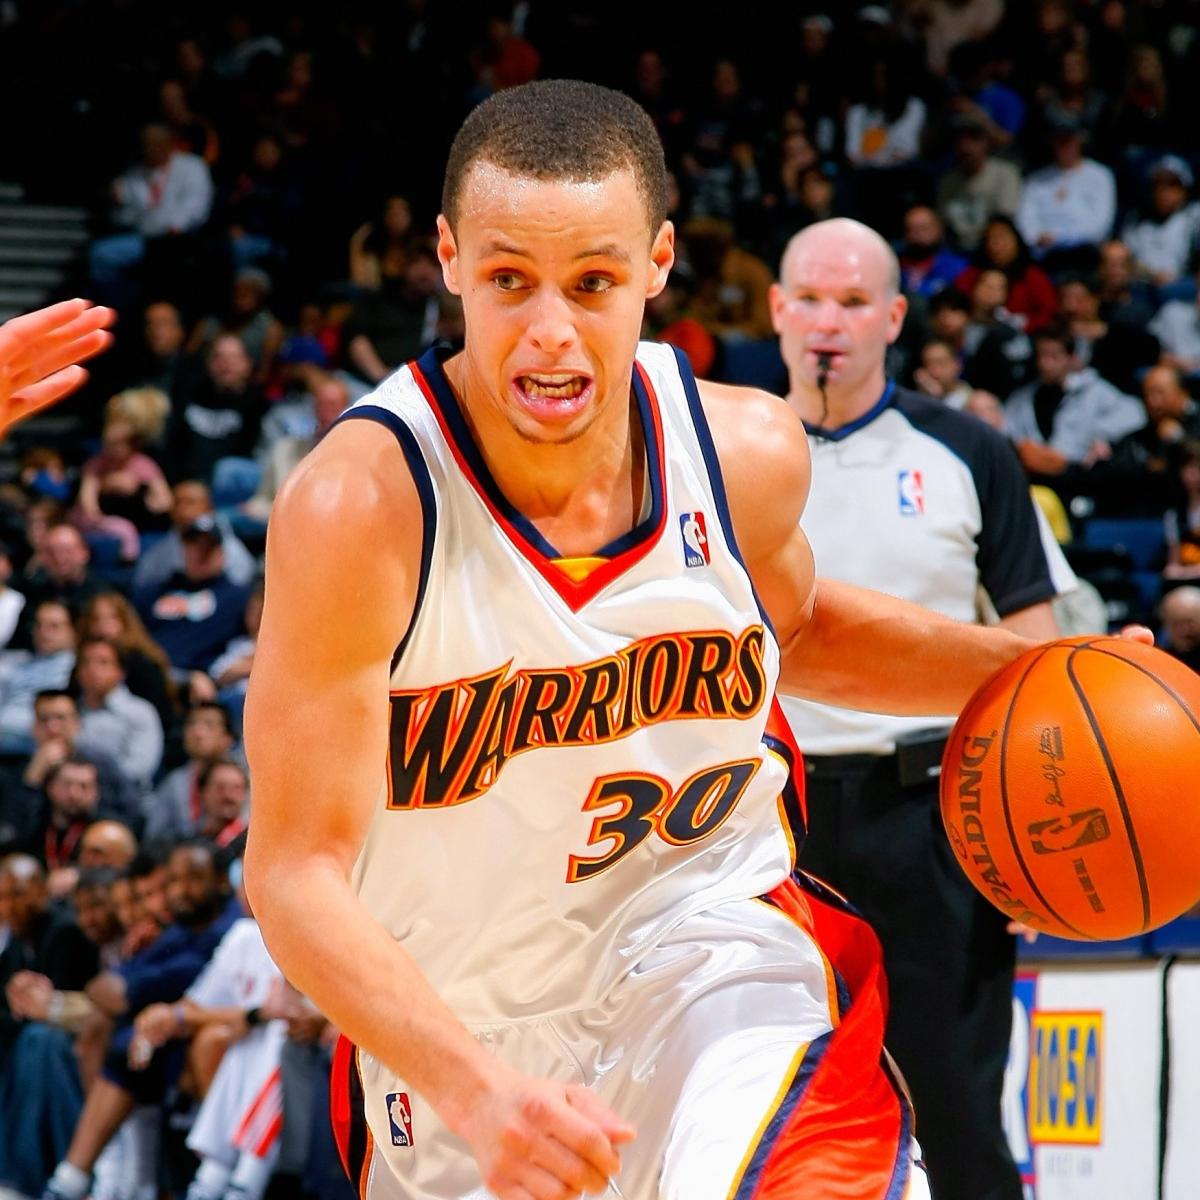 Steph Curry reflects on what draft experts said about him in 2009